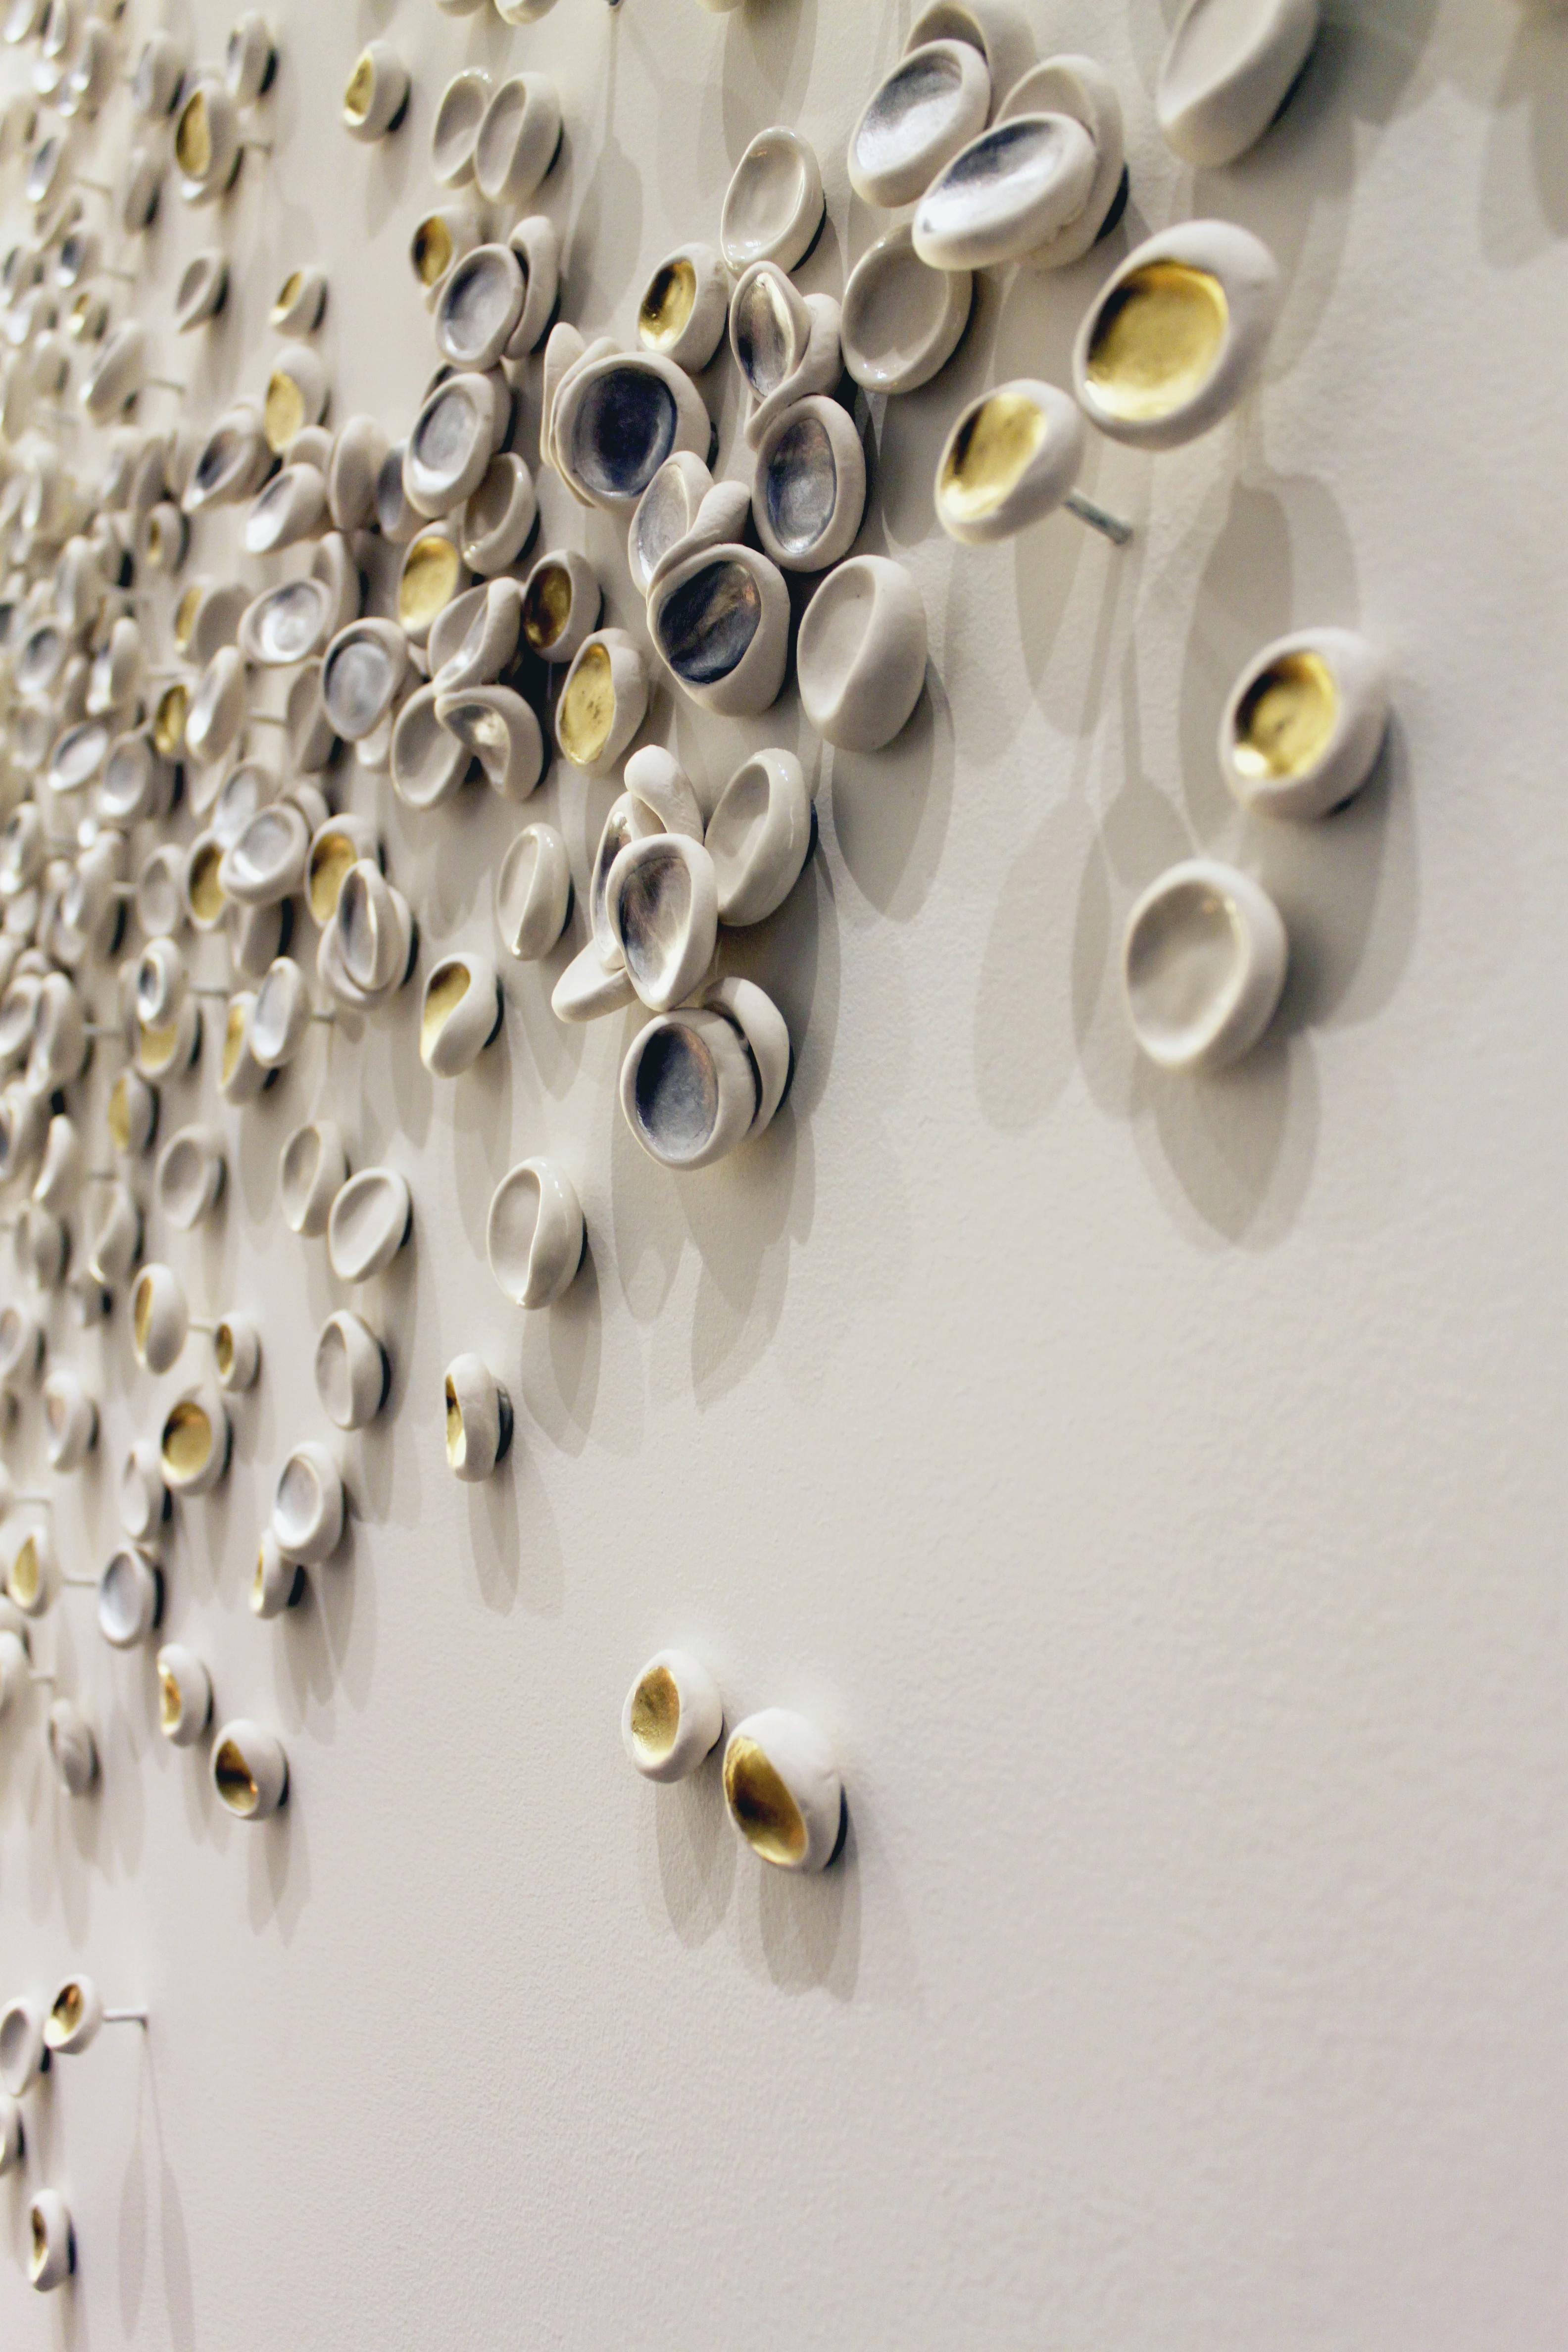 Close-up of small porcelain pieces with gold leaf by artist Christina Watka.